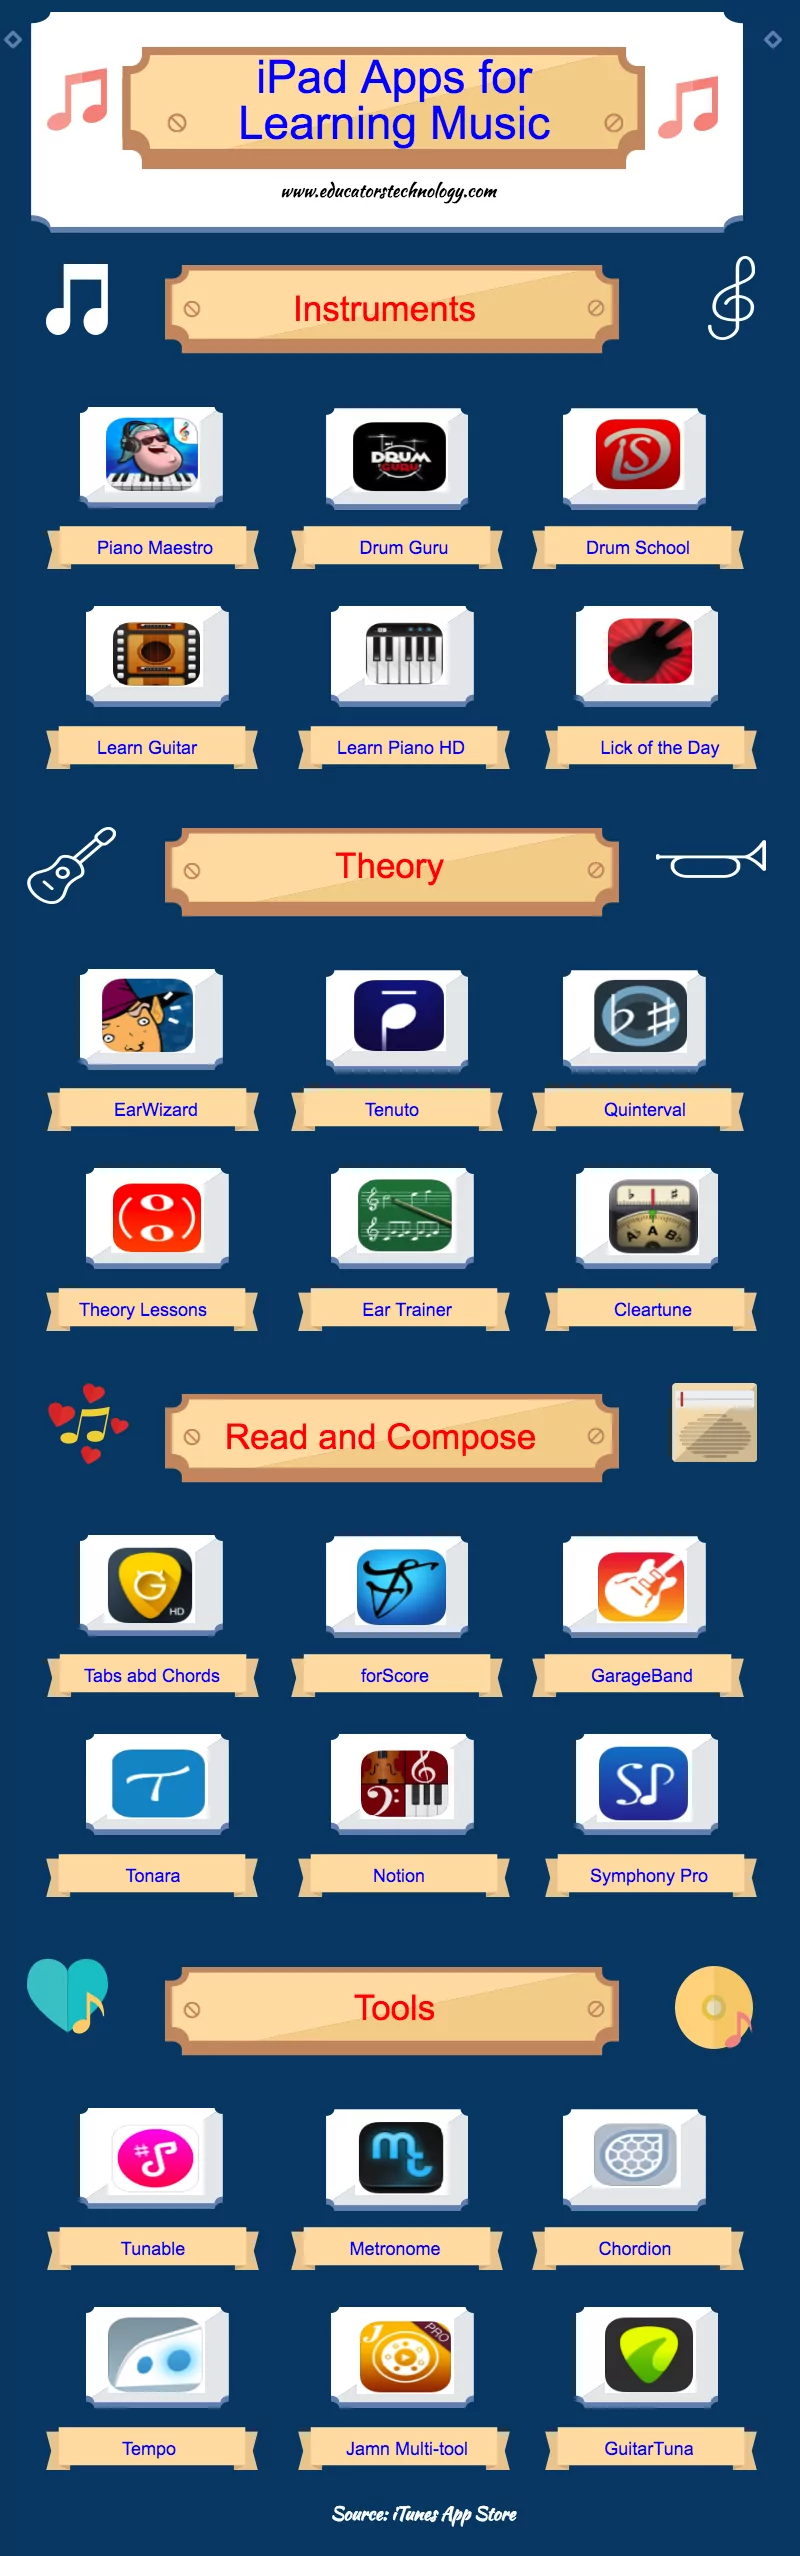 An Interesting Infographic Featuring Top Apps for Learning Music